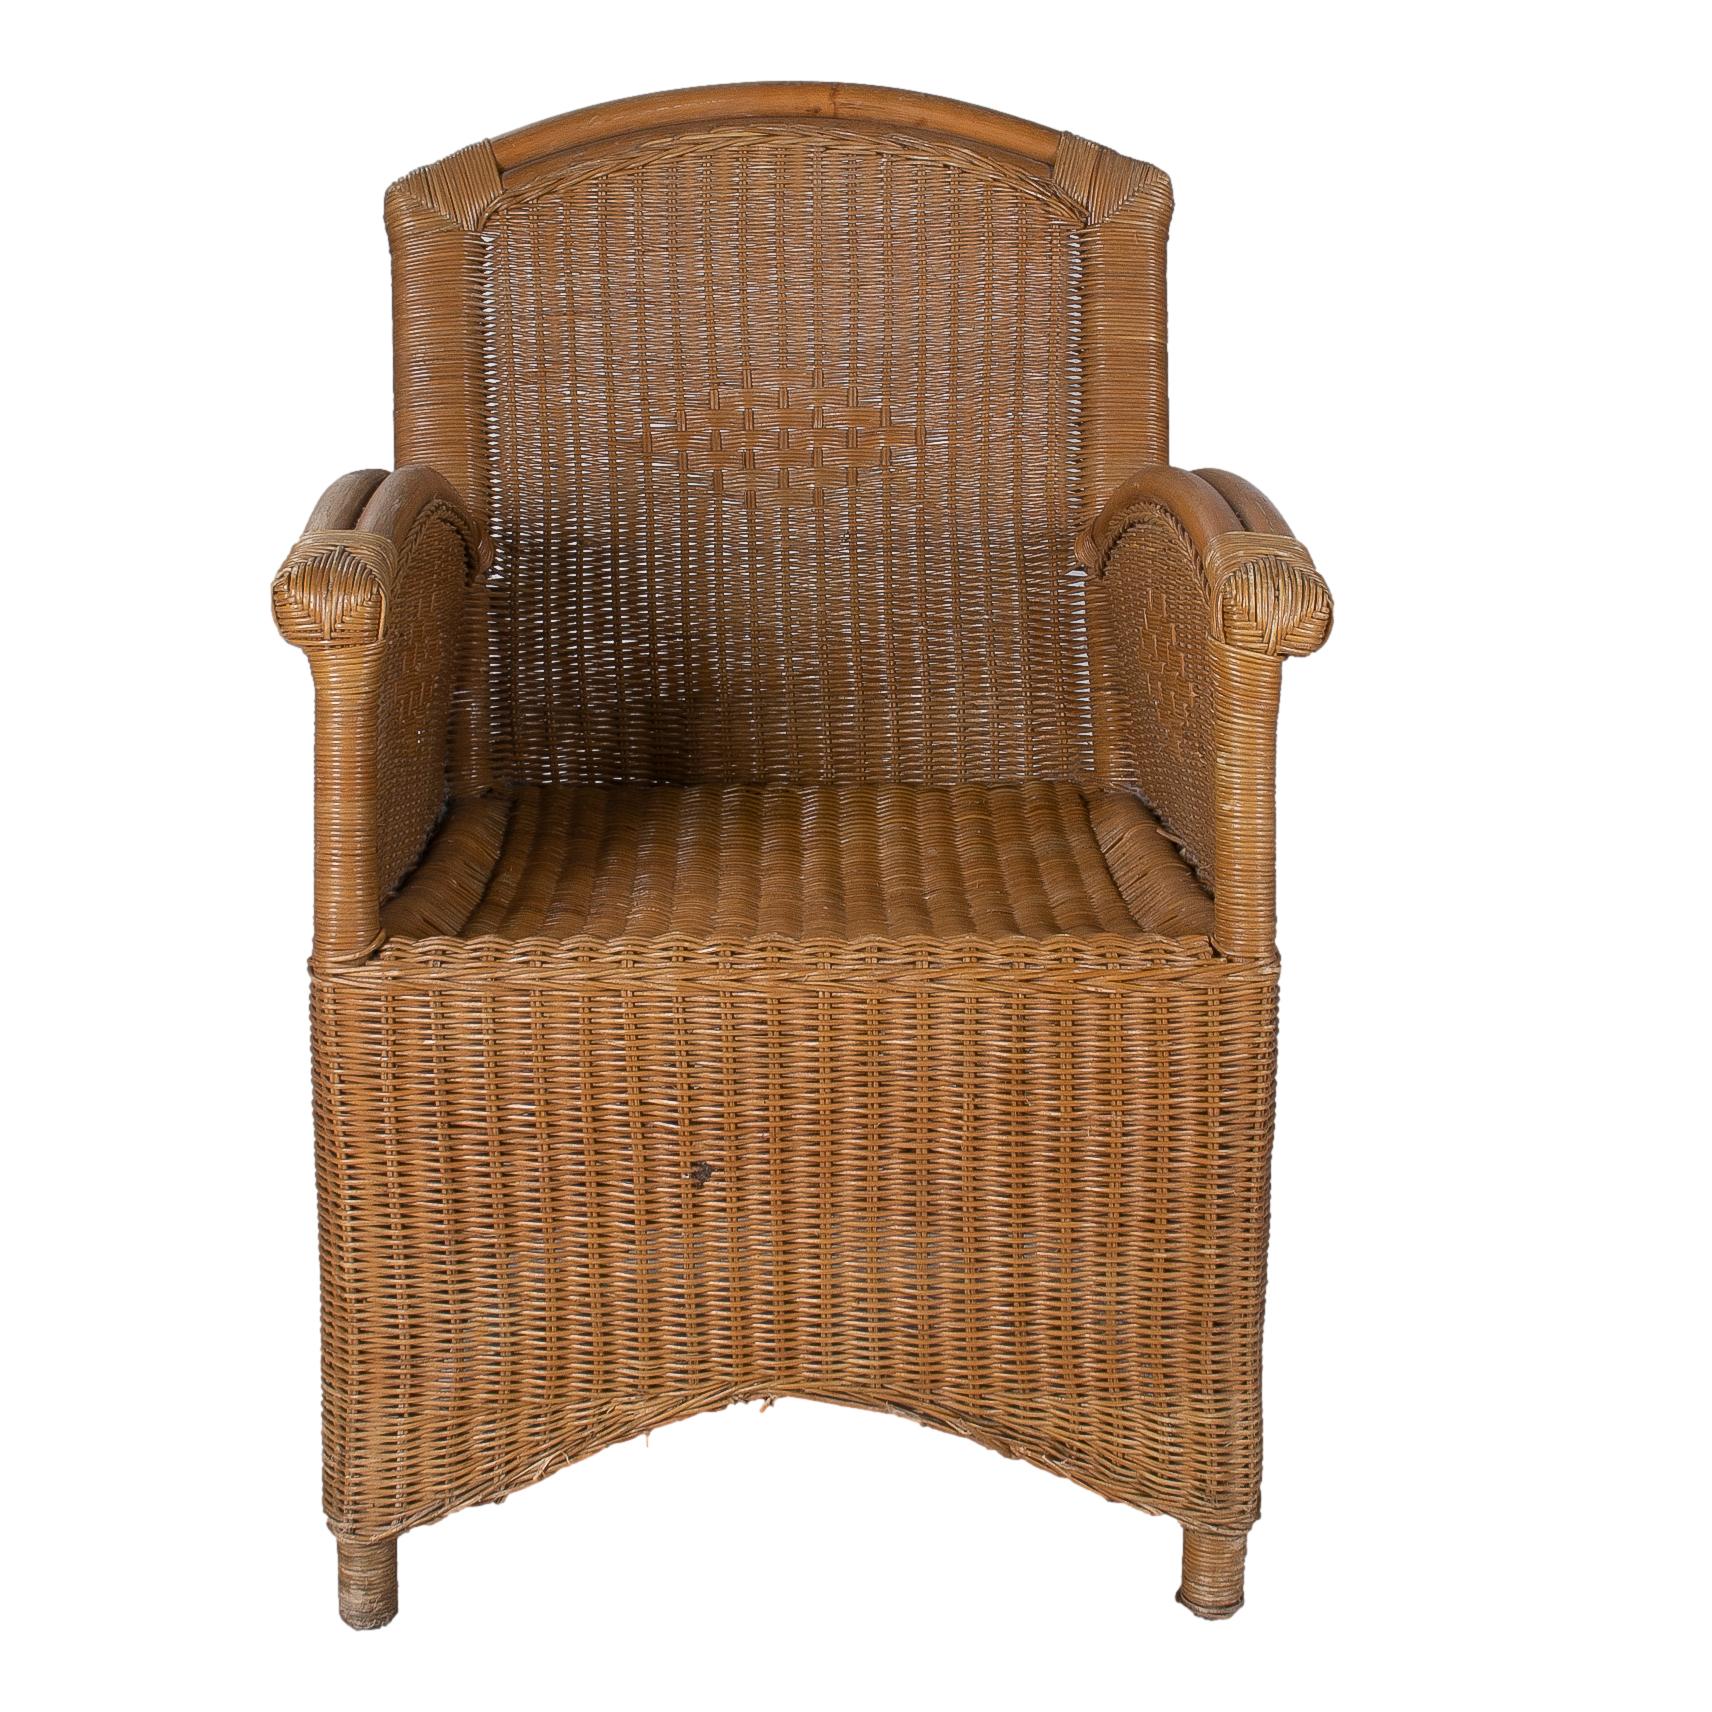 Vintage 1970s Spanish pair of hand woven wicker and bamboo armchairs.